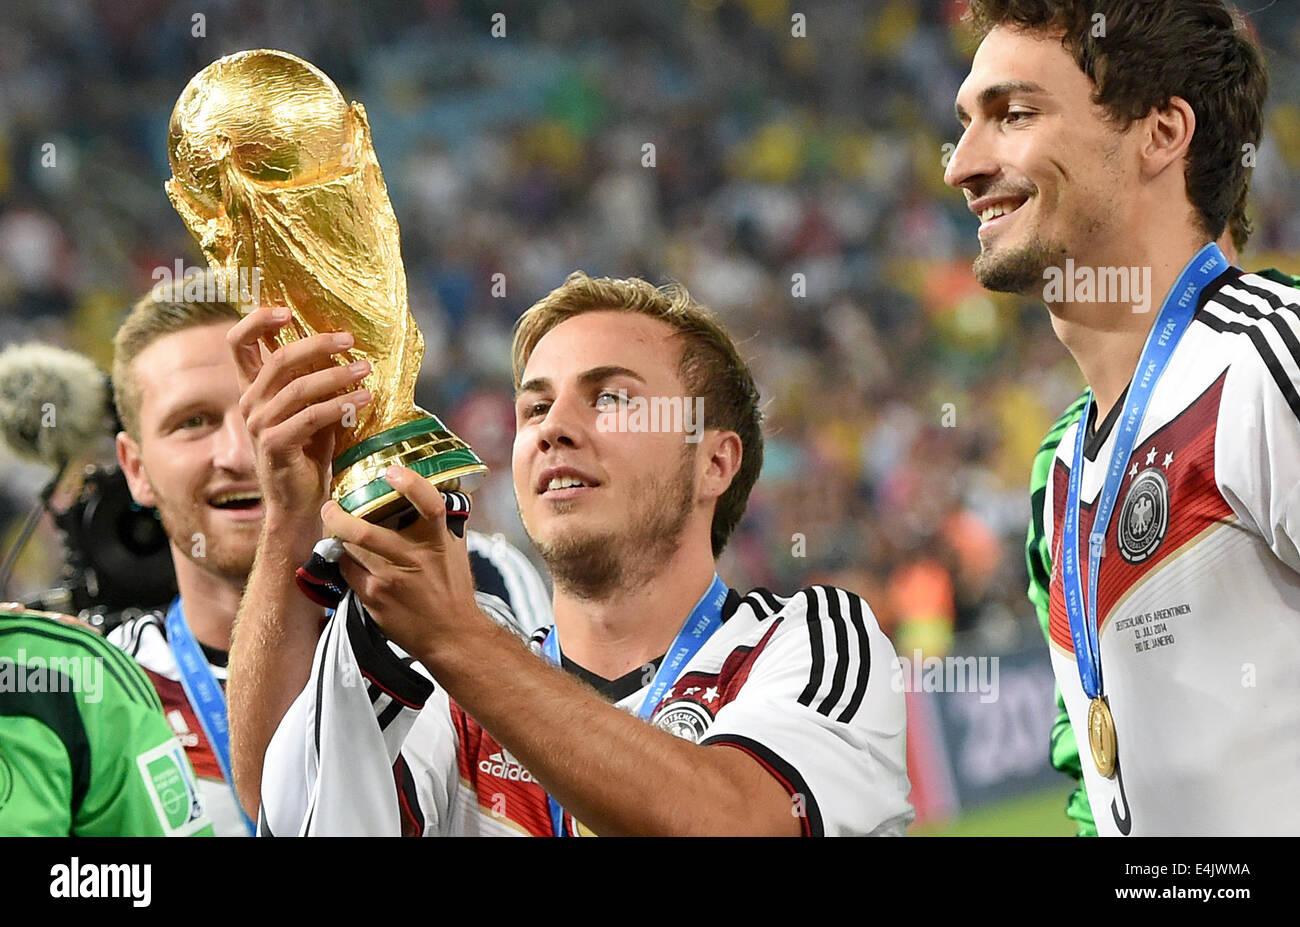 Rio de Janeiro, Brazil. 13th July, 2014. Mario Goetze of Germany who shot the winning goal poses with the World Cup after winning the FIFA World Cup 2014 final soccer match between Germany and Argentina at the Estadio do Maracana in Rio de Janeiro, Brazil, 13 July 2014. At right his team-mate Mats Hummels. Photo: Marcus Brandt/dpa/Alamy Live News Stock Photo